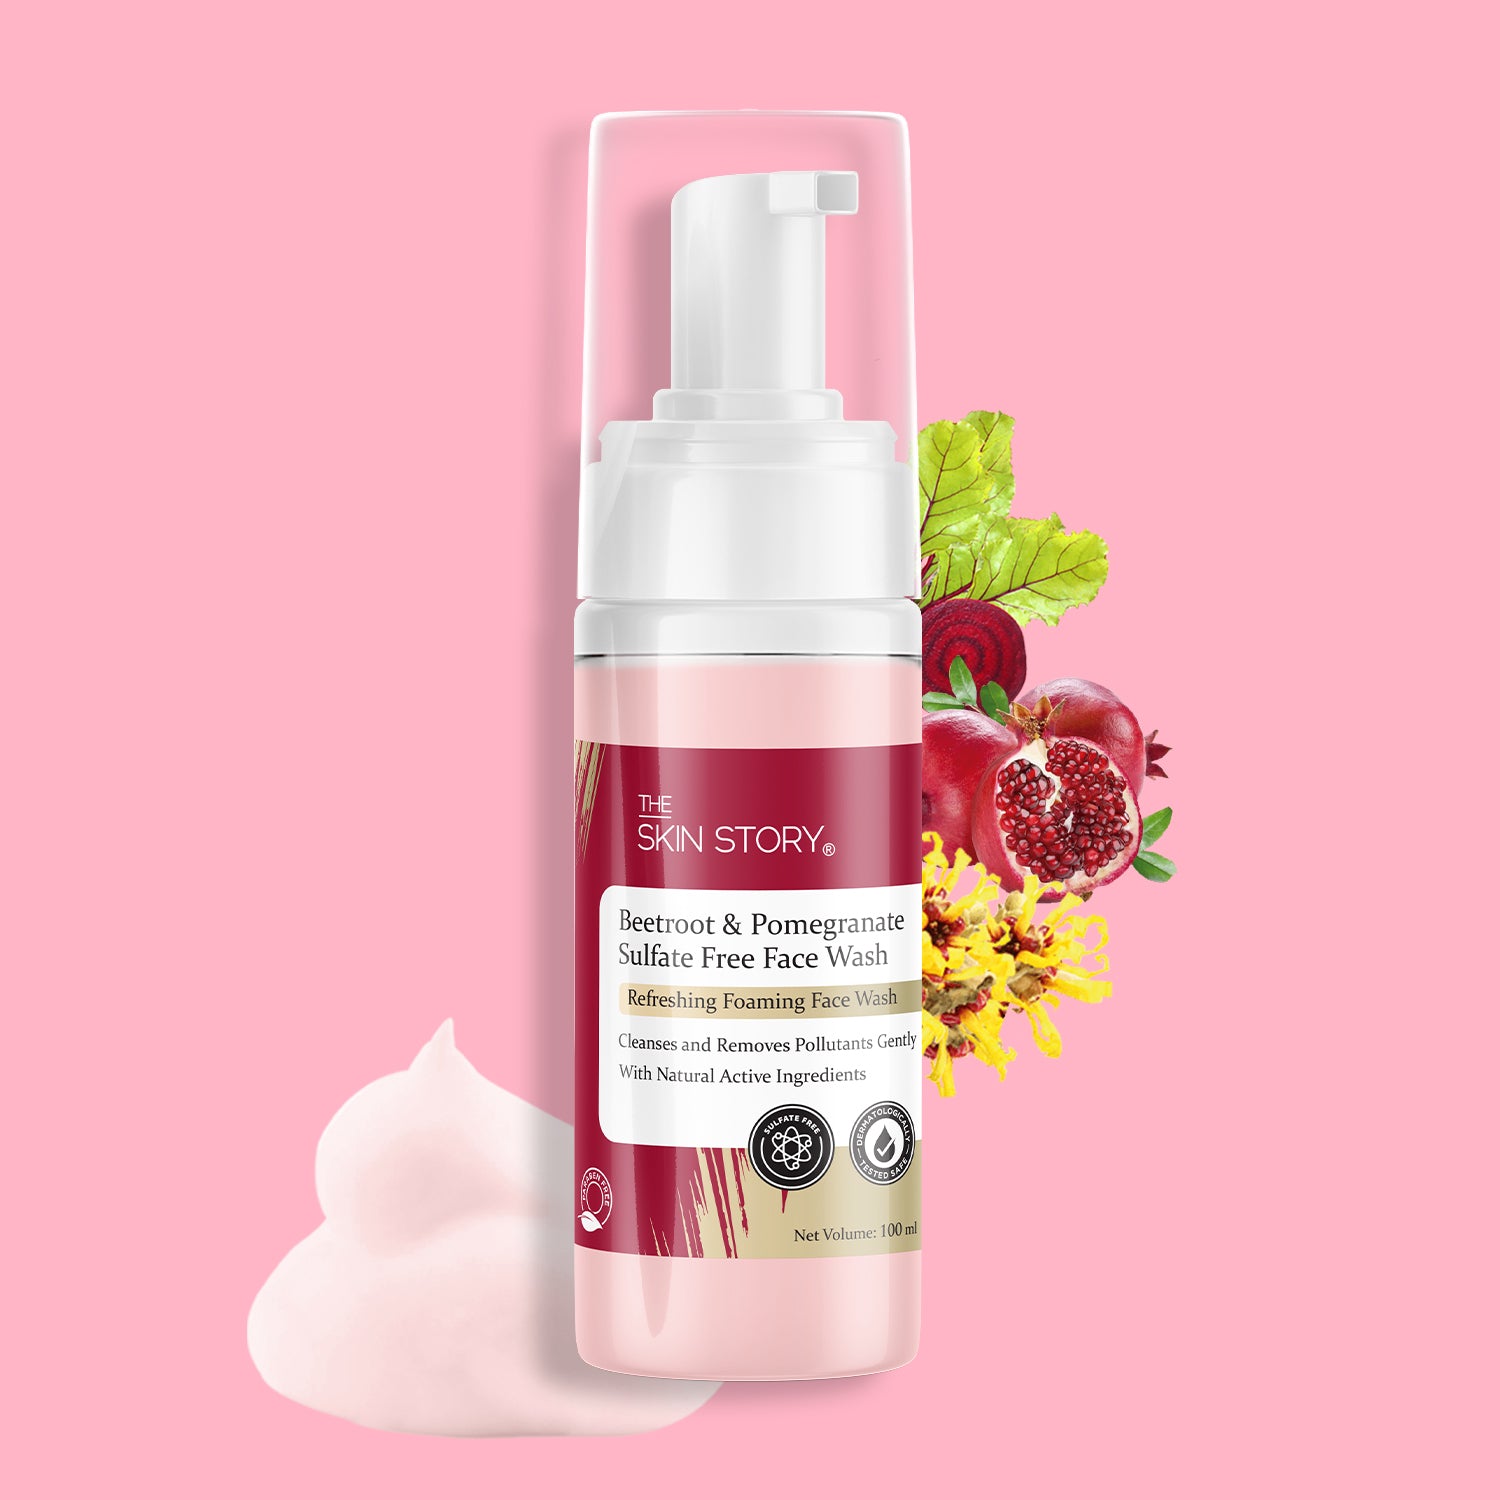 Pore Cleansing Foaming Face Wash With Beetroot & Pomegranate